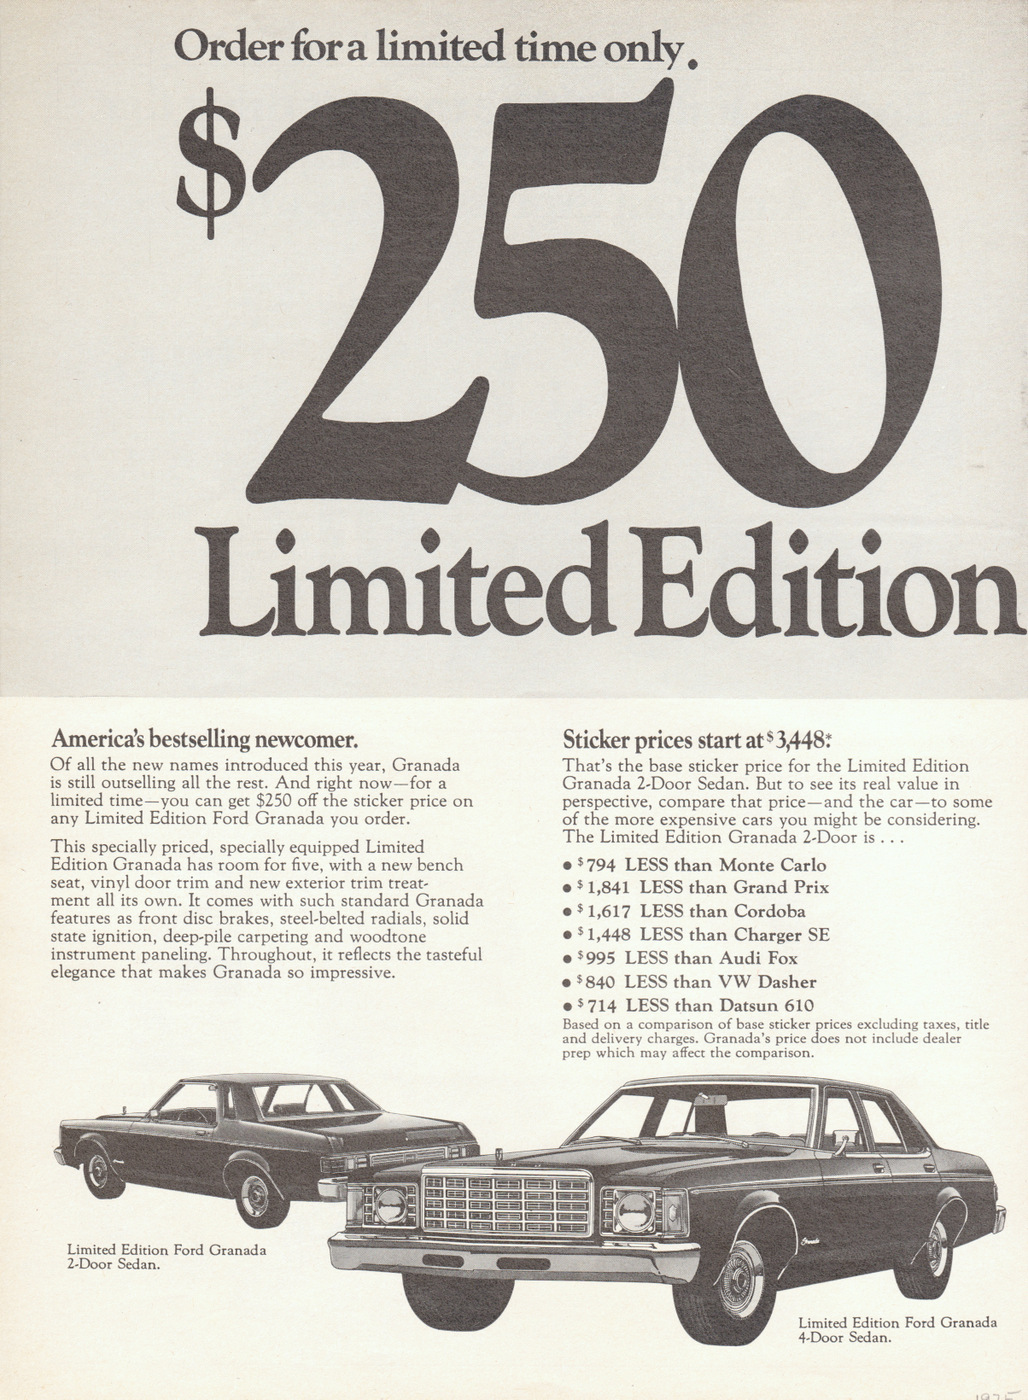 Limited Edition Ford Granada, Scarcity heuristic